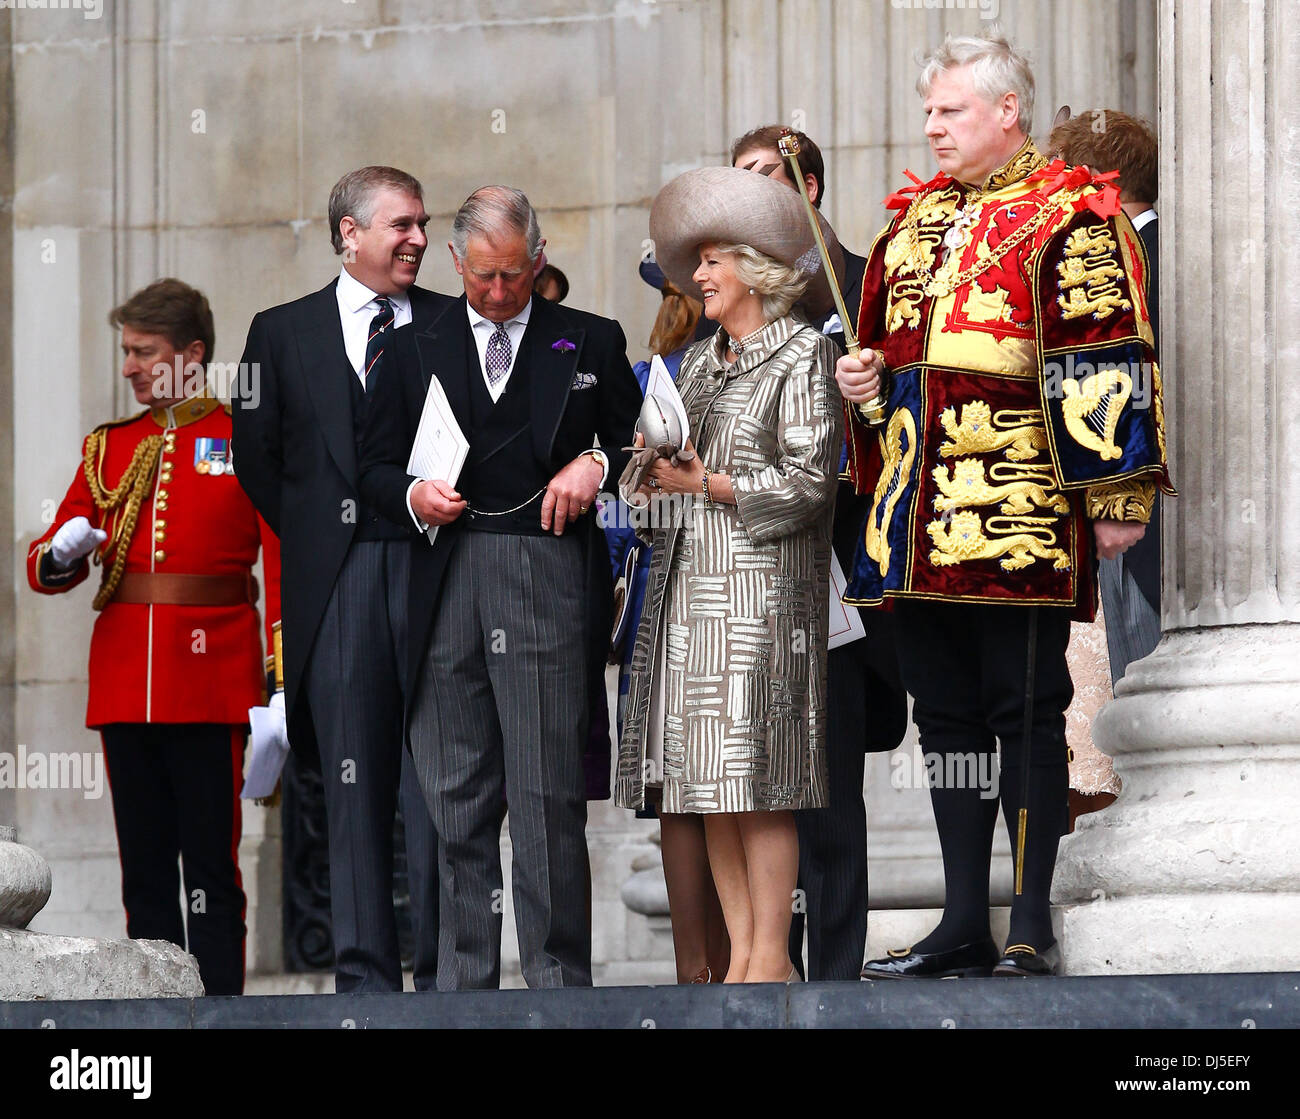 Prince Charles, the Duke of Cambridge and Camilla, Duchess of Cornwall  leaving the Queen's Diamond Jubilee thanksgiving service at St. Paul's  Cathedral London, England - 05.06.12 Stock Photo - Alamy